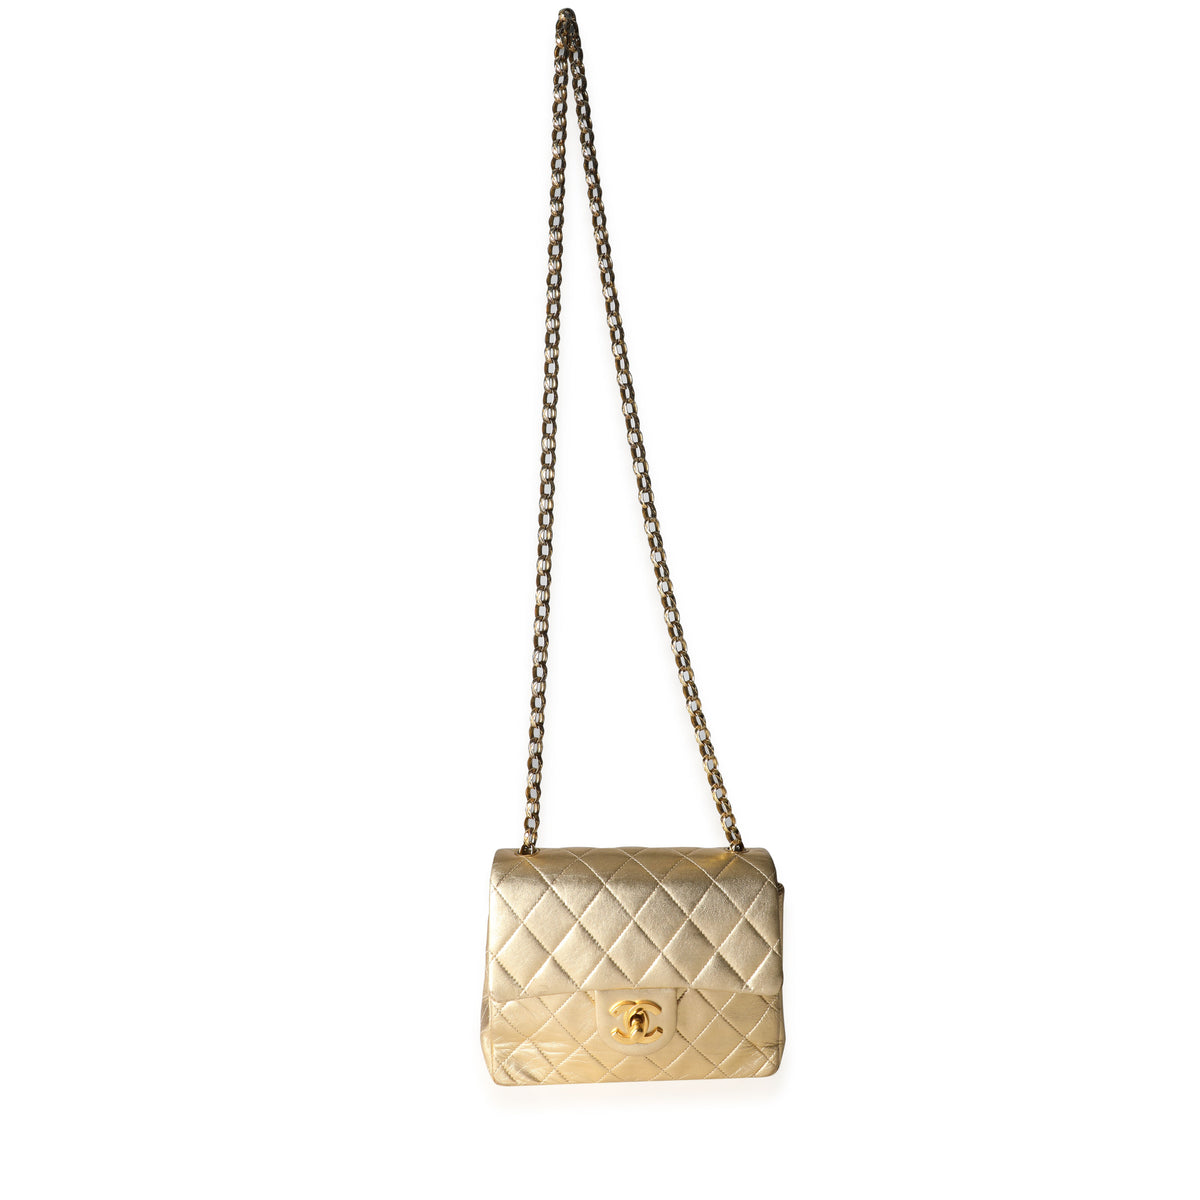 Chanel Metallic Gold Quilted Lambskin Extra Mini Chain Flap Shoulder Bag